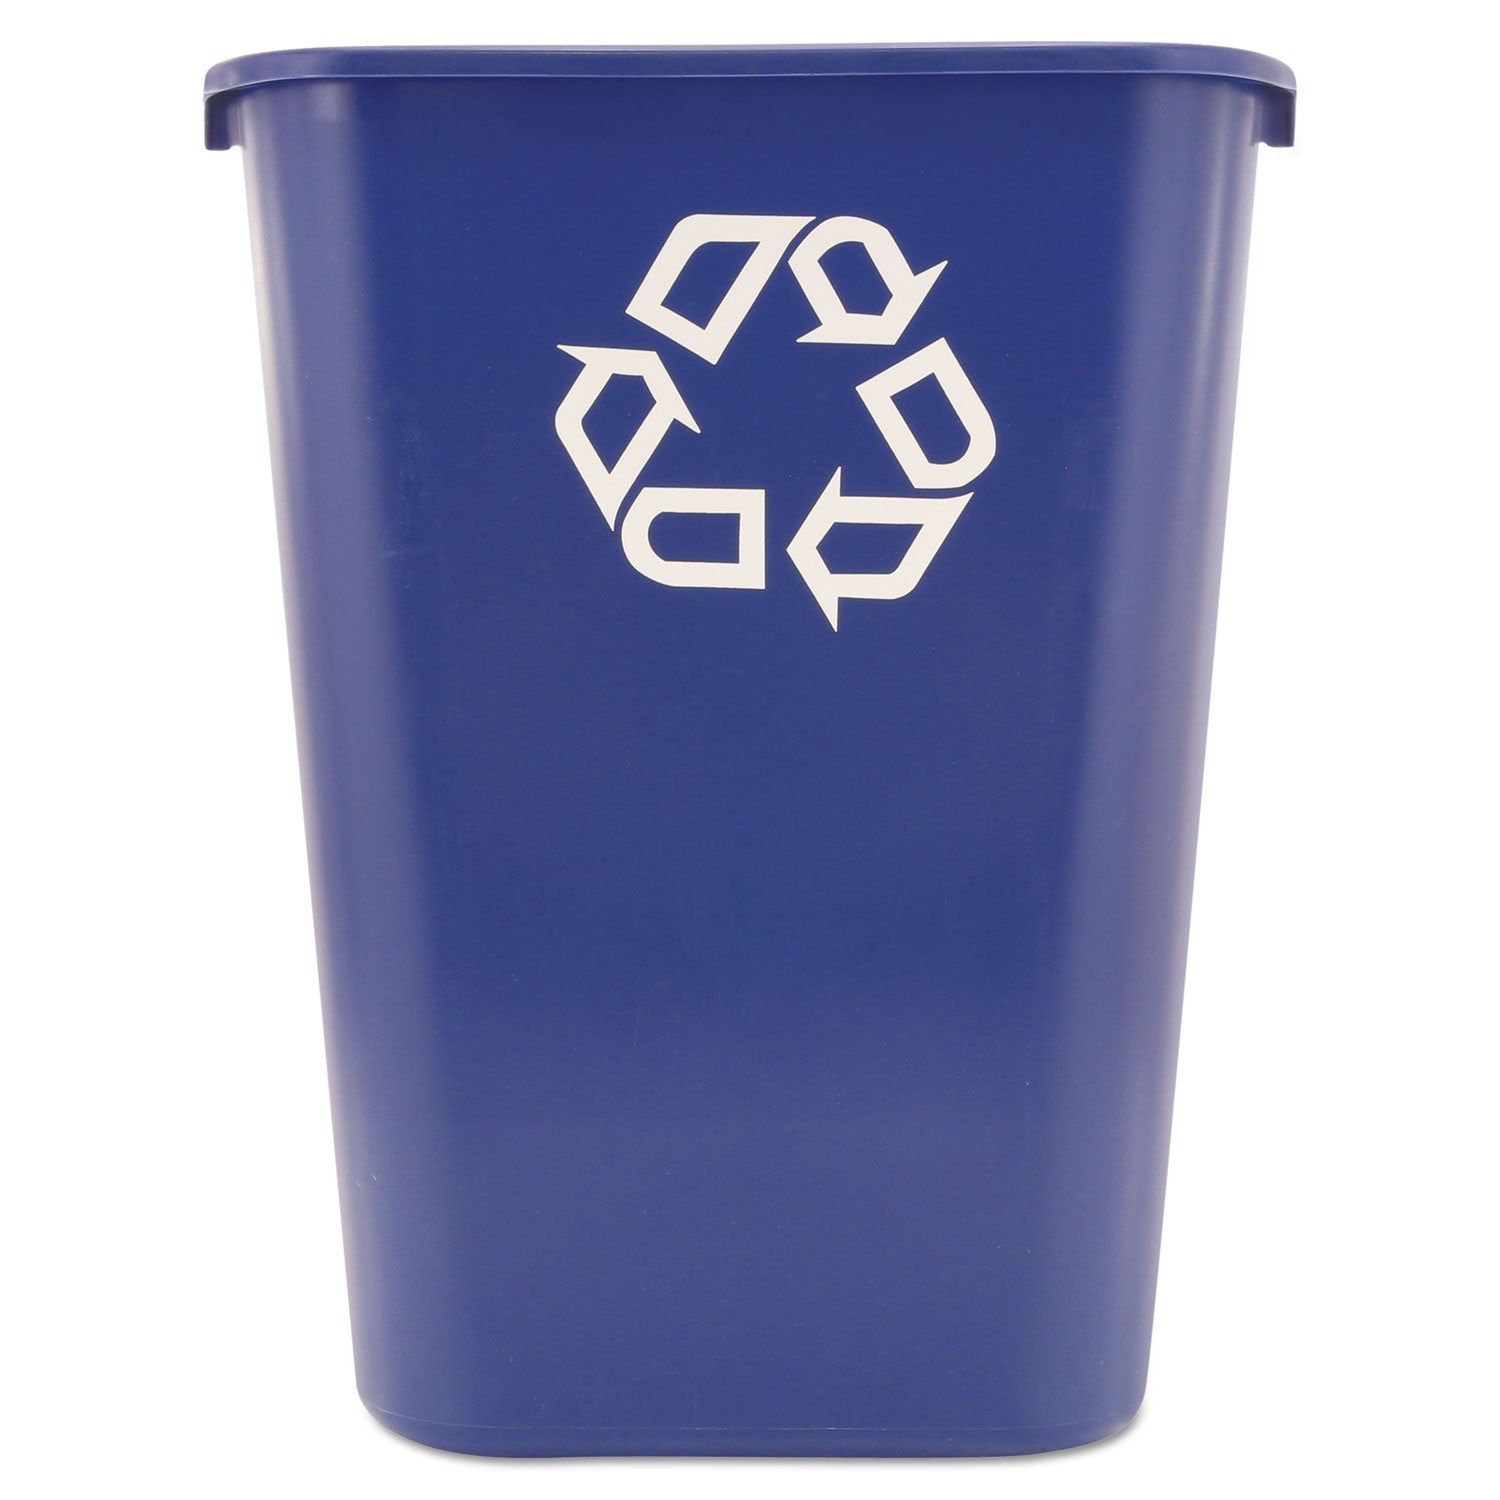 Deskside Recycling Container with Symbol, Large, 41.25 qt, Plastic, Blue - 